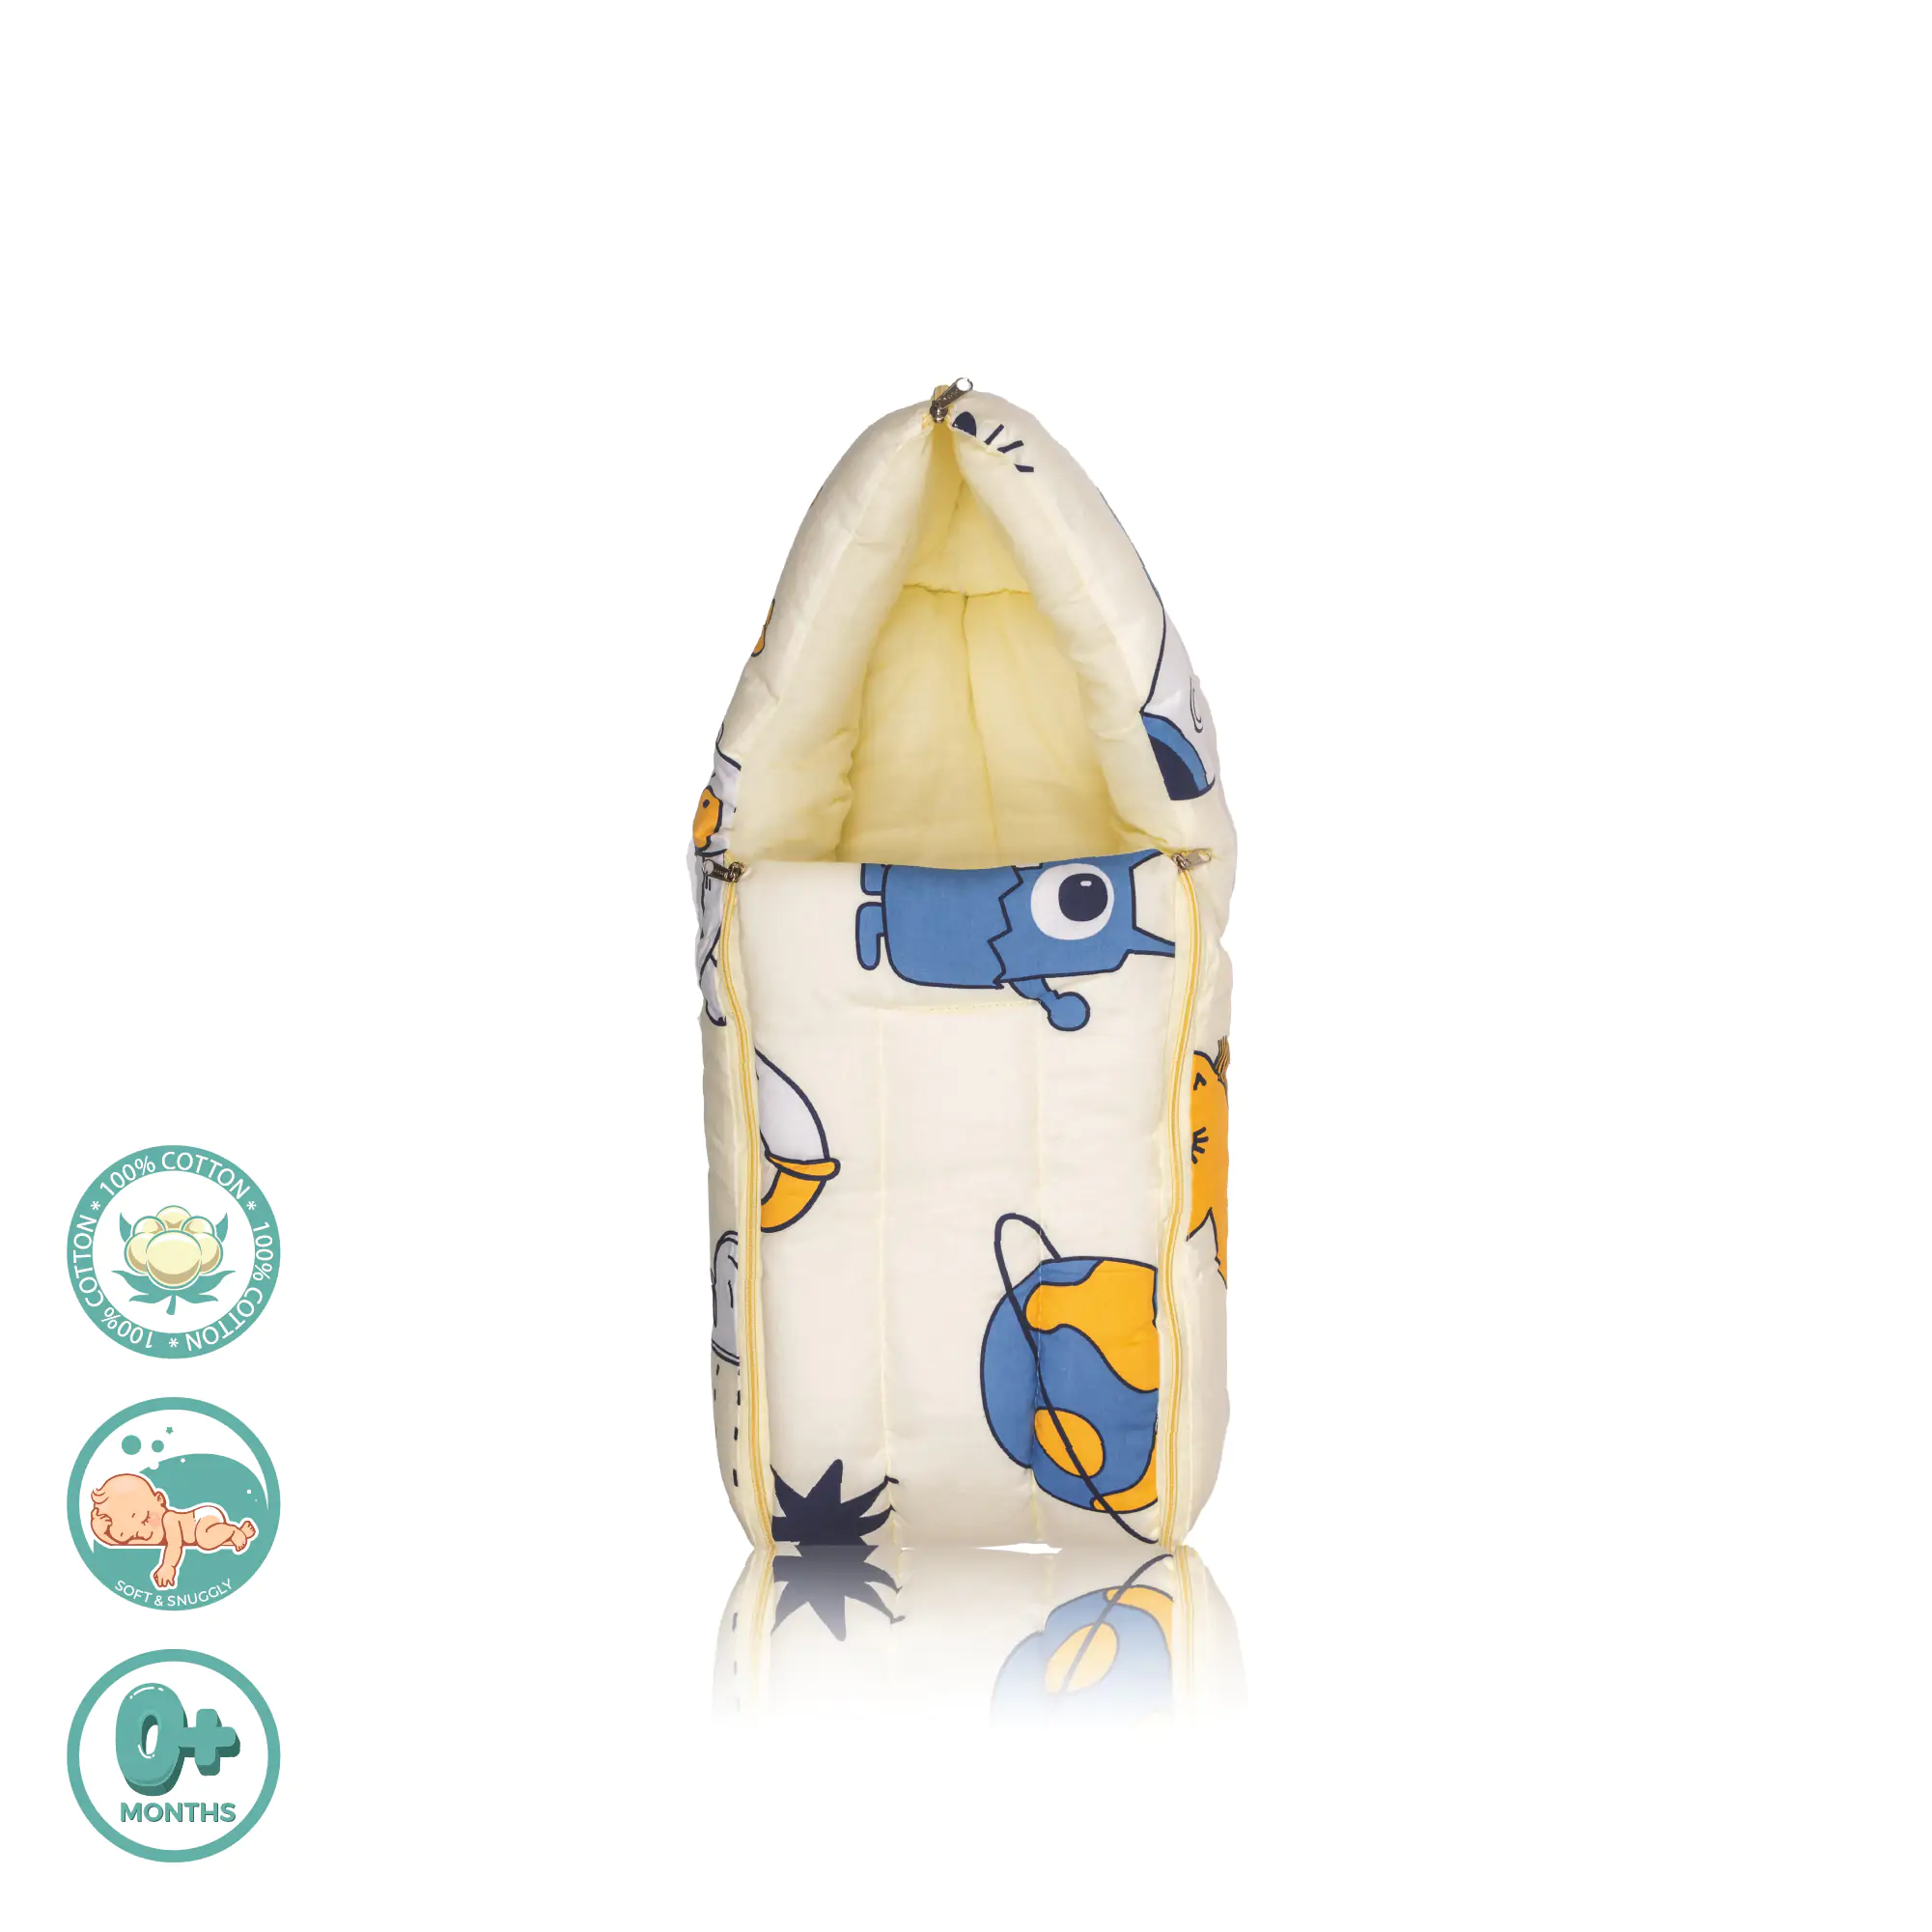 Mylo 4–in-1 Soft & Snuggly Baby Sleeping Bag/ Carry Nest with 3-way Zip Opening- Happy Space